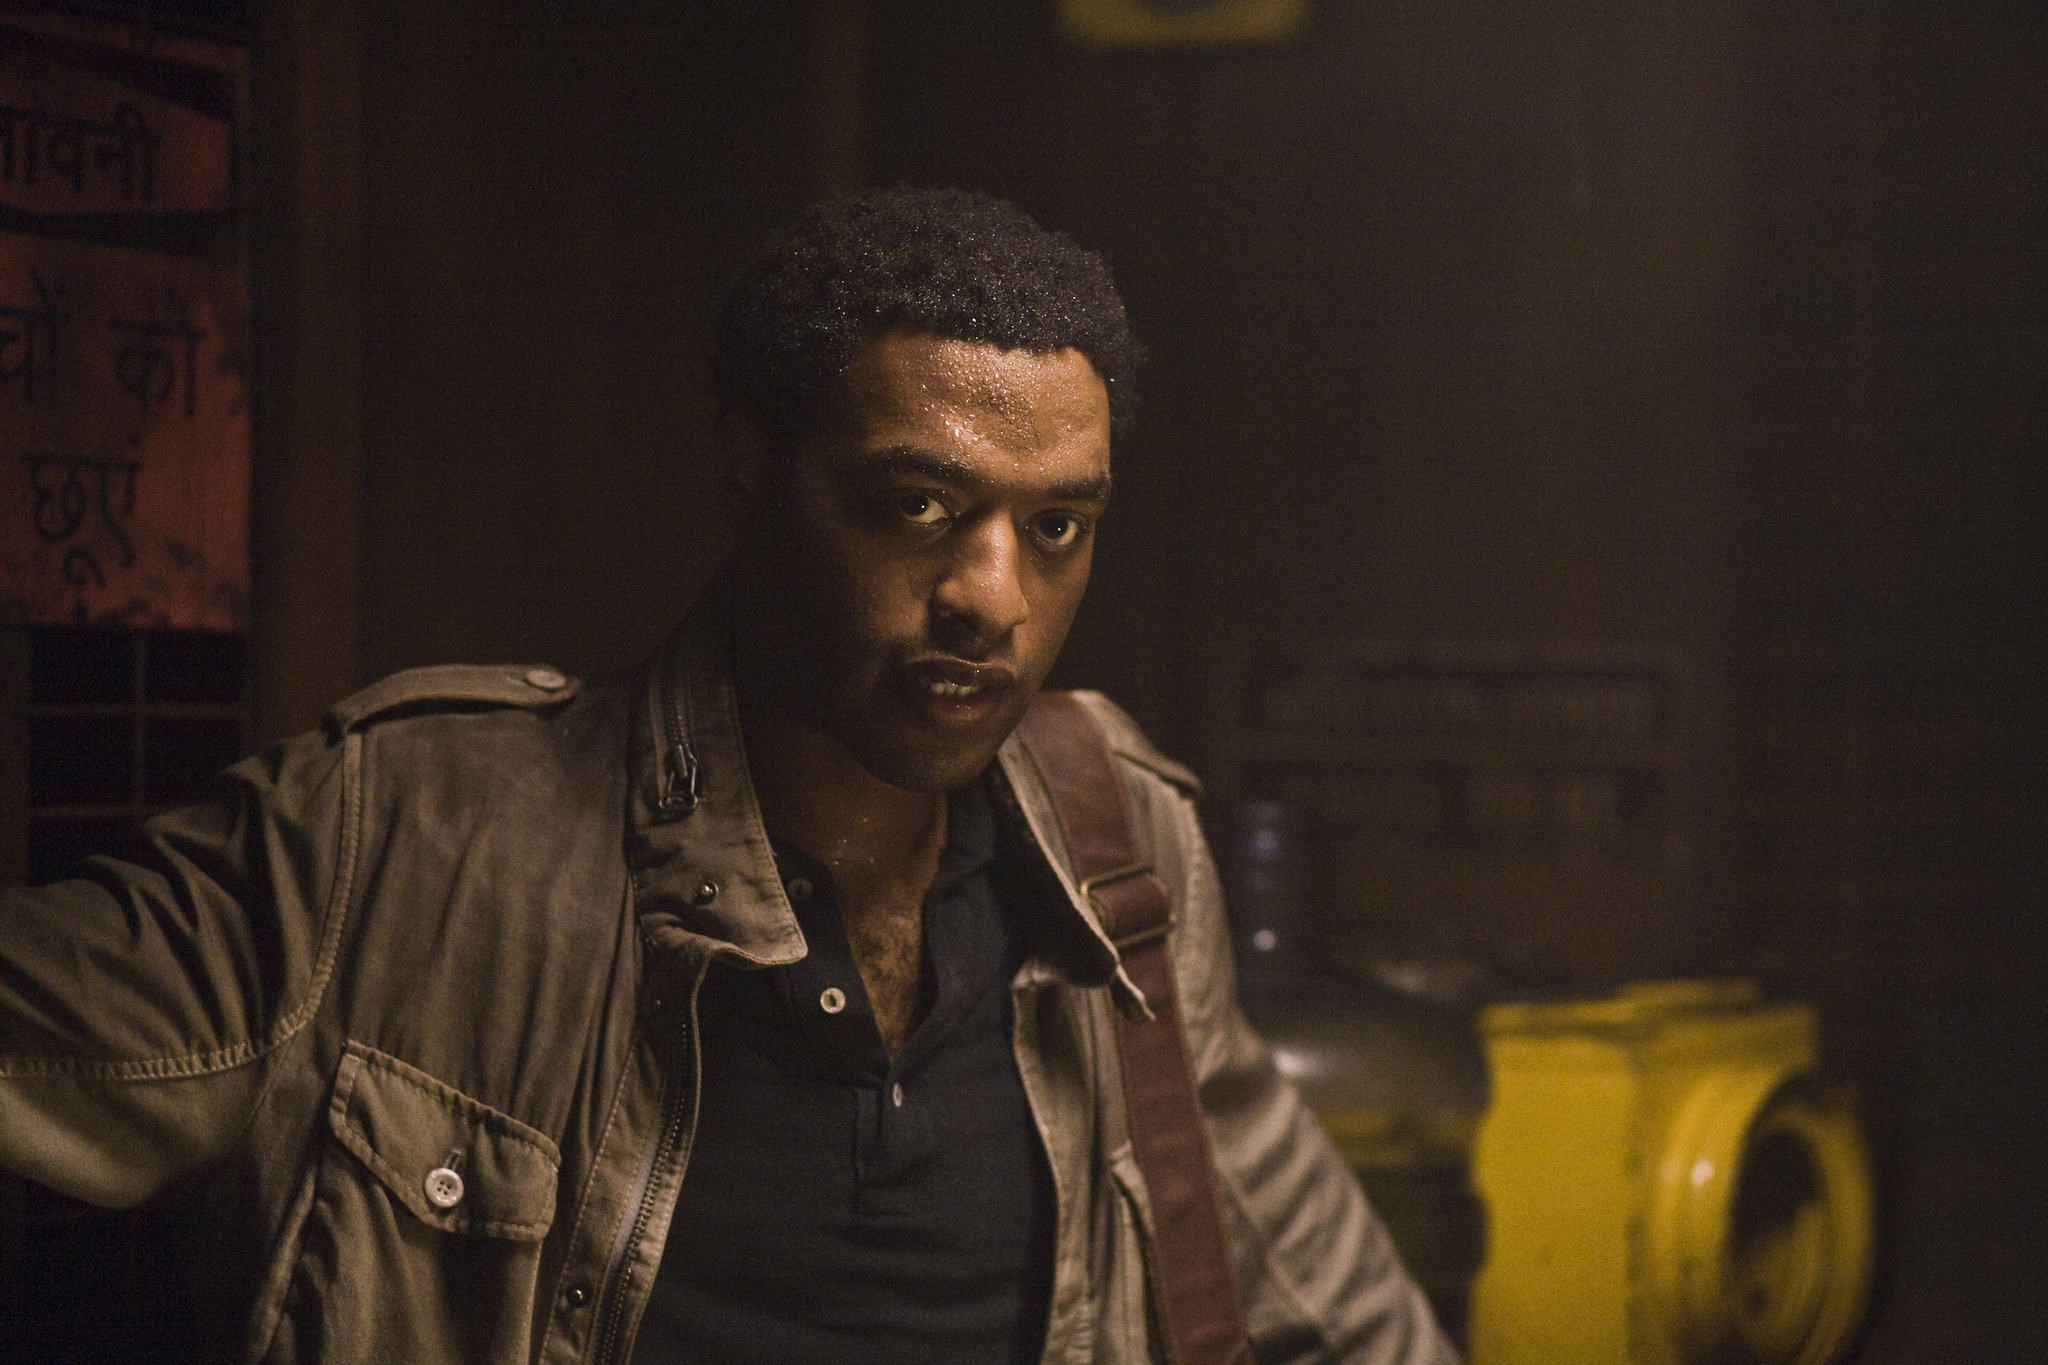 Still of Chiwetel Ejiofor in 2012 (2009)